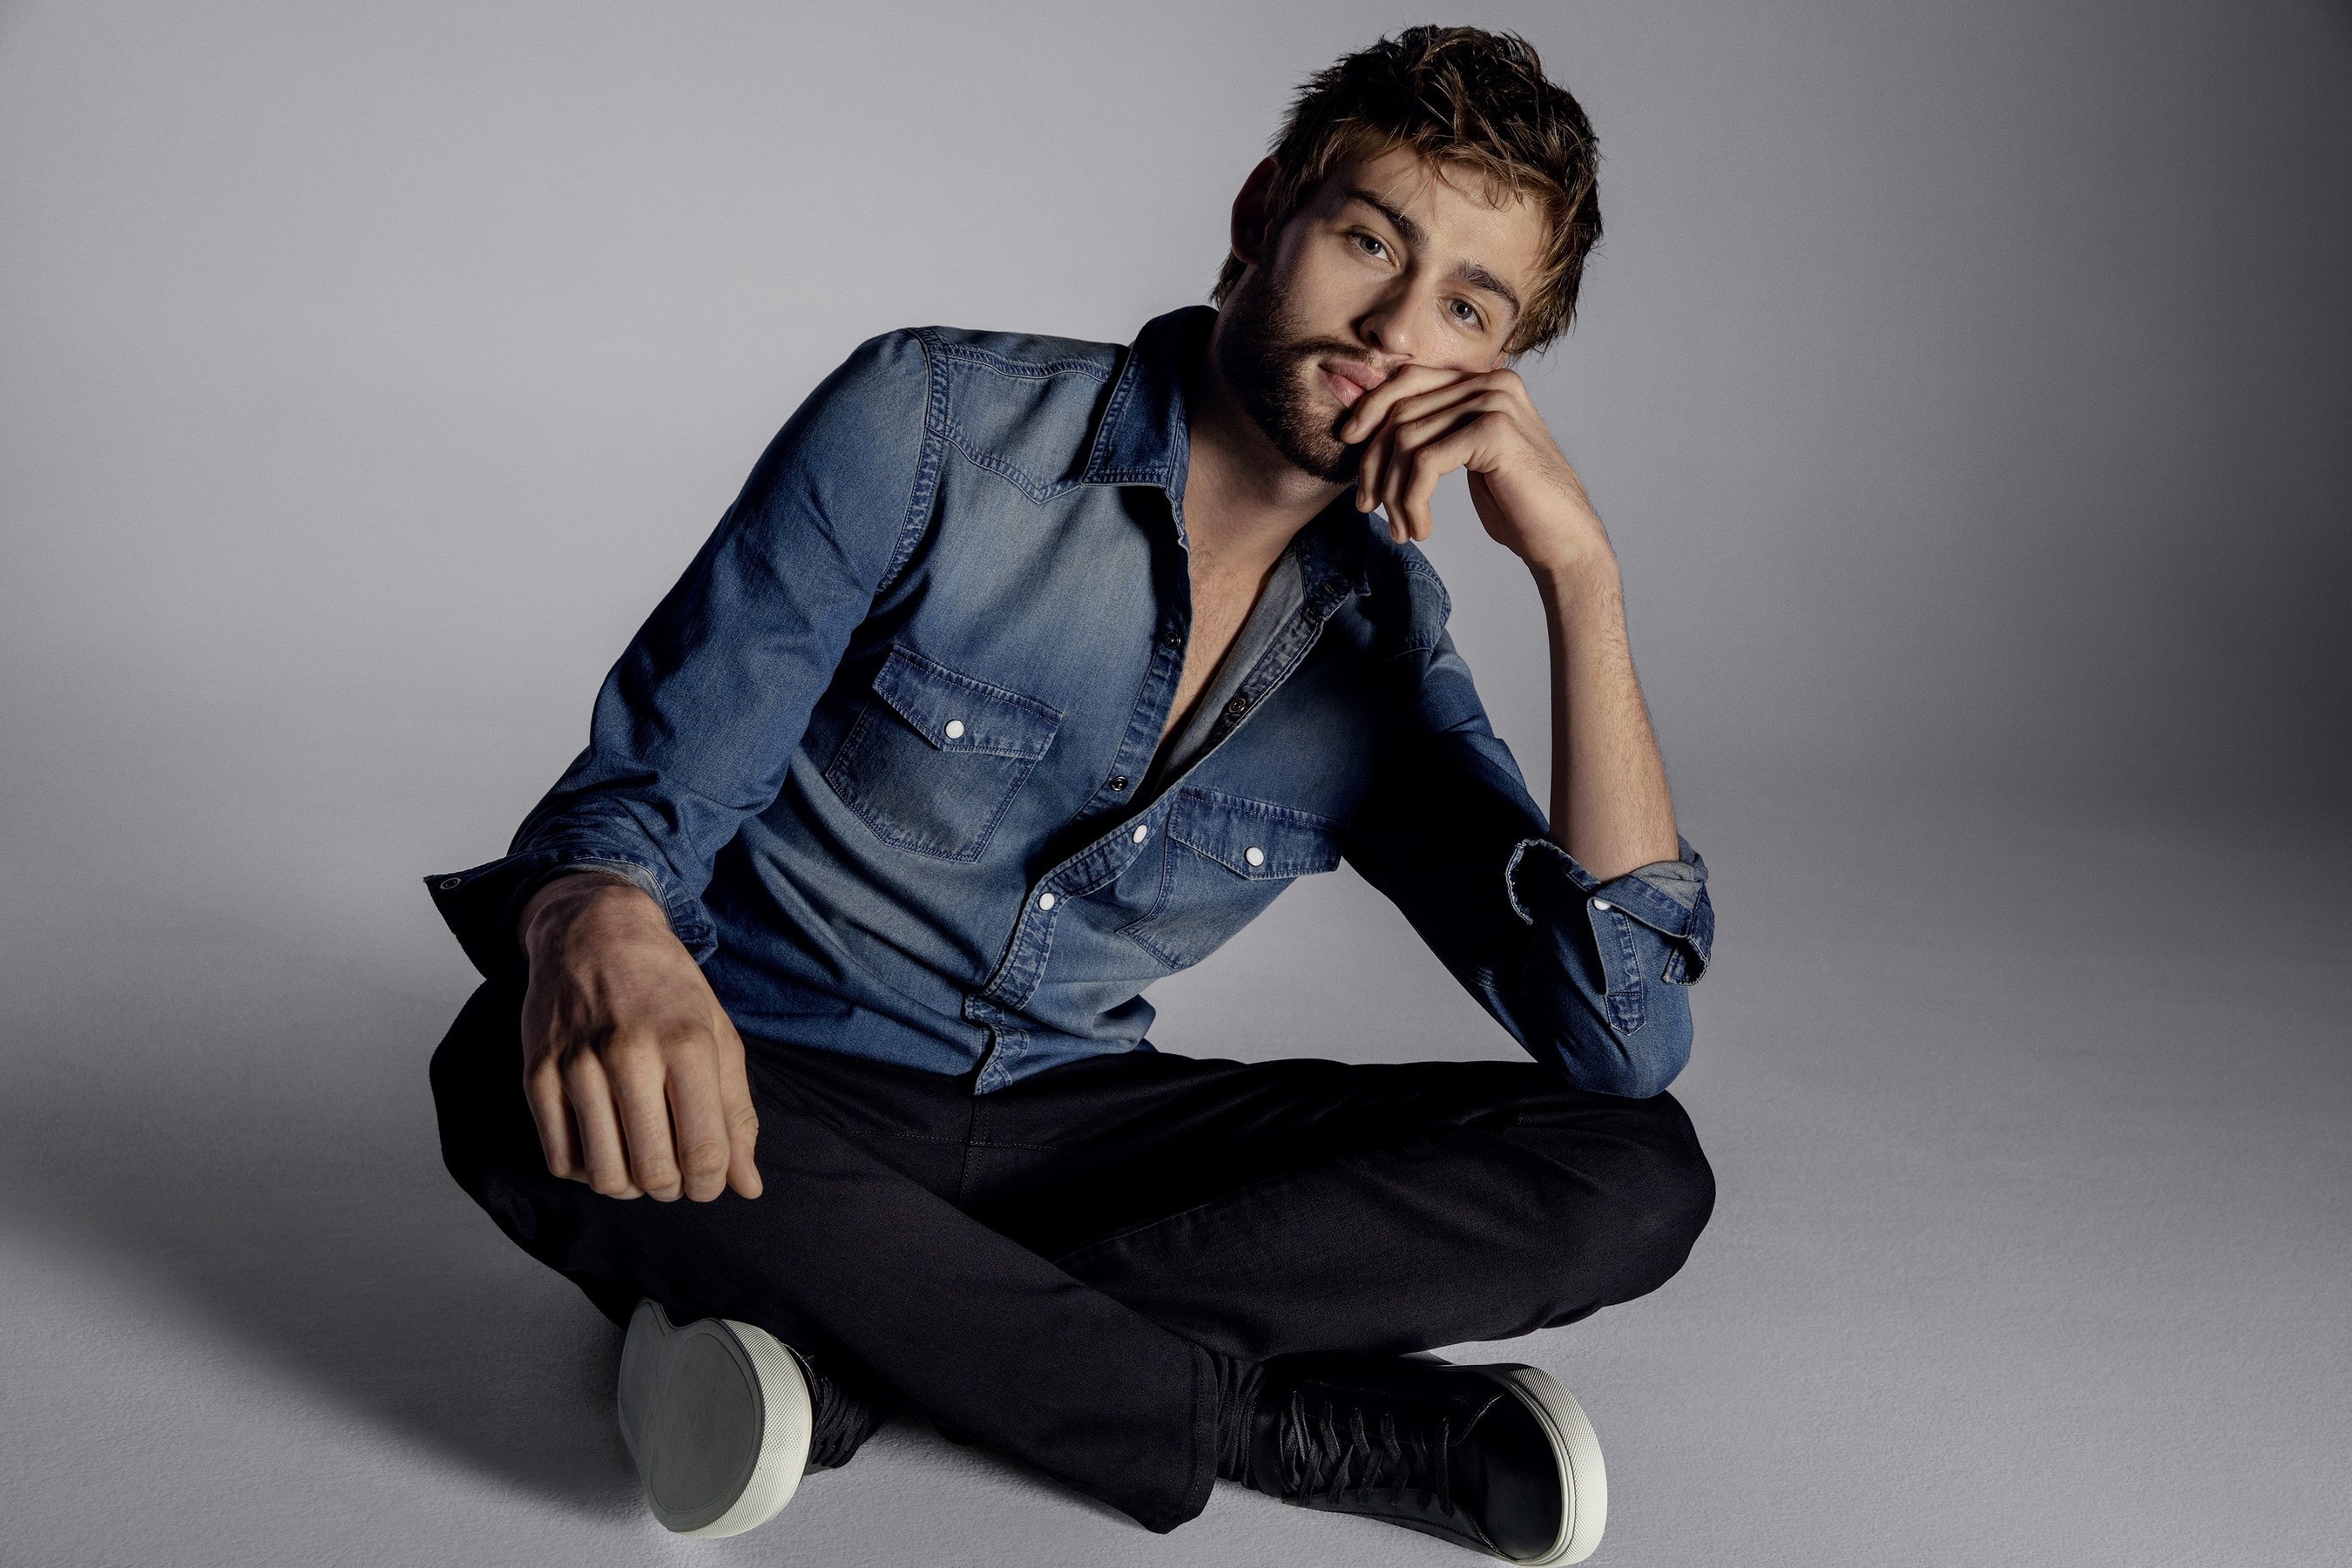 #ExpressLife by Douglas Booth